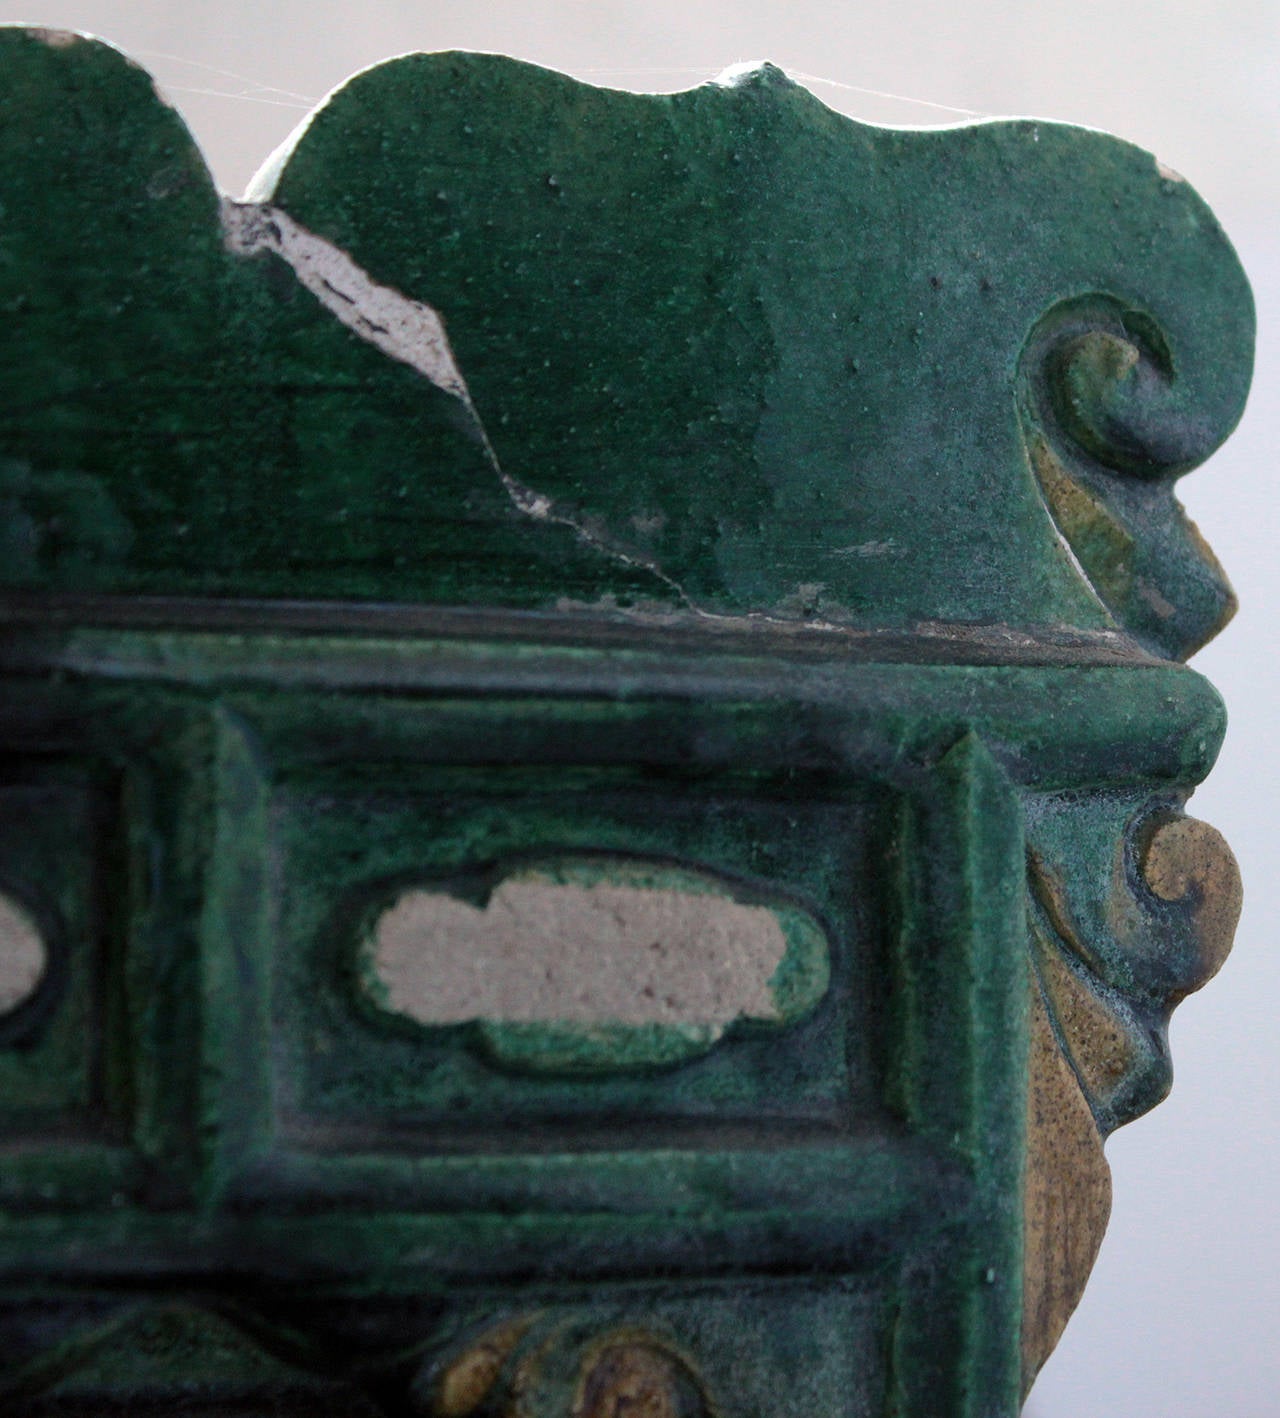 Massive Chinese pottery temple model, with realistic modelling of walls and roof features, glazed in a green and ochre glaze.      
Ming Dynasty, 15th-16th century     

Provenance: Australian collection, Melbourne, purchased in the 1980's.   